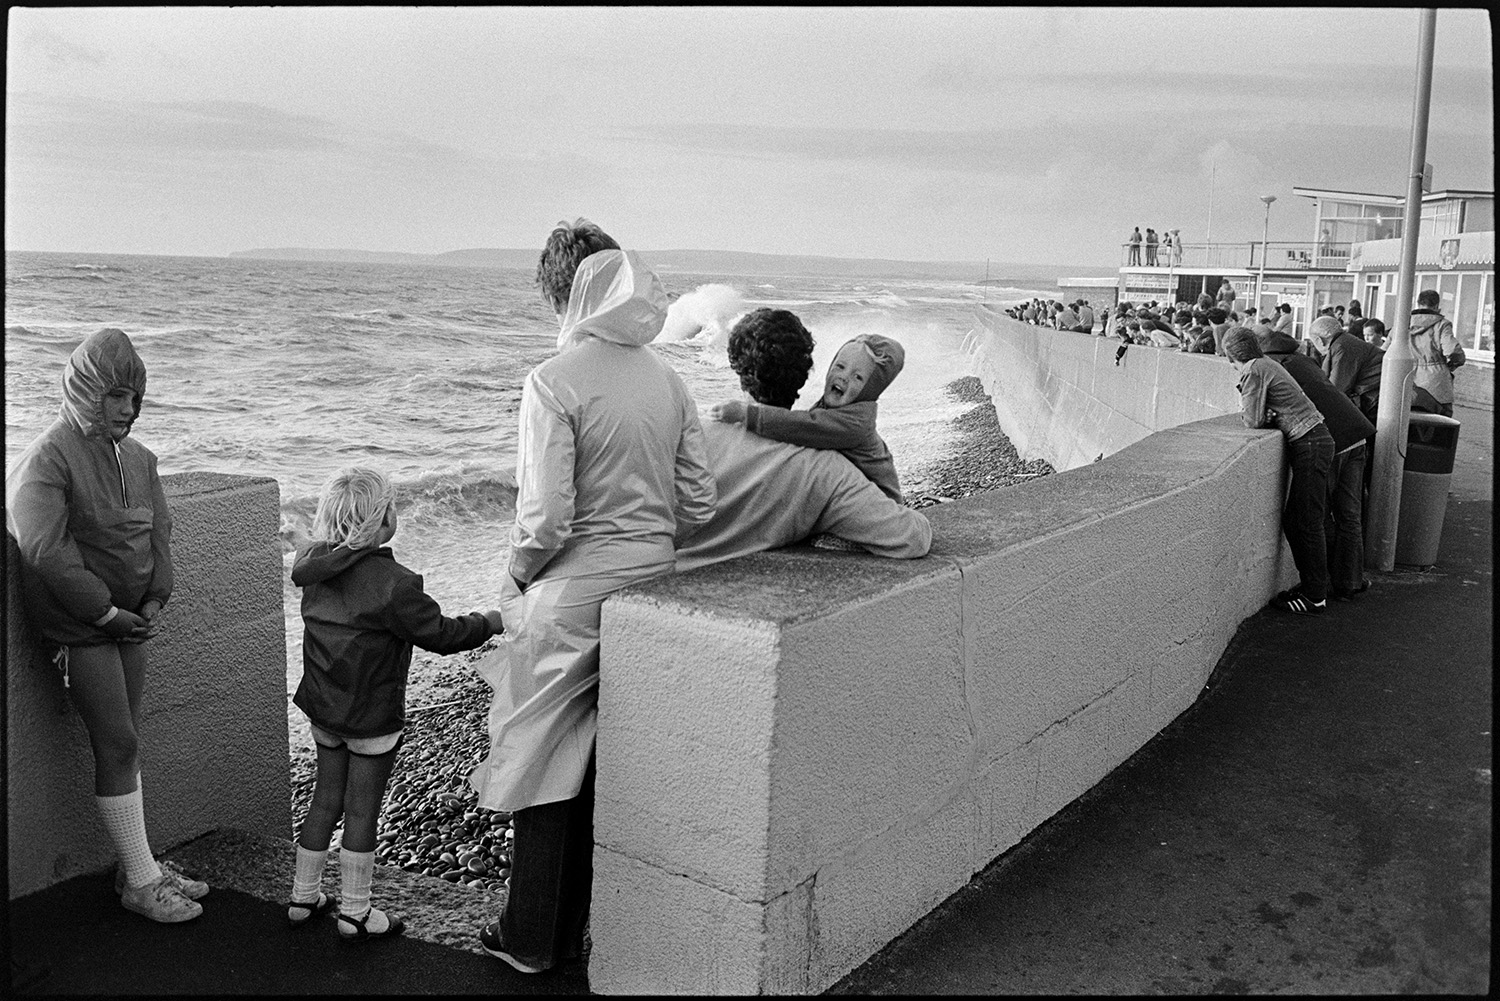 Holidaymakers watching rough sea breaking over sea wall, dodging waves. 
[Holidaymakers watching waves break against the sea wall at Westward Ho!.]